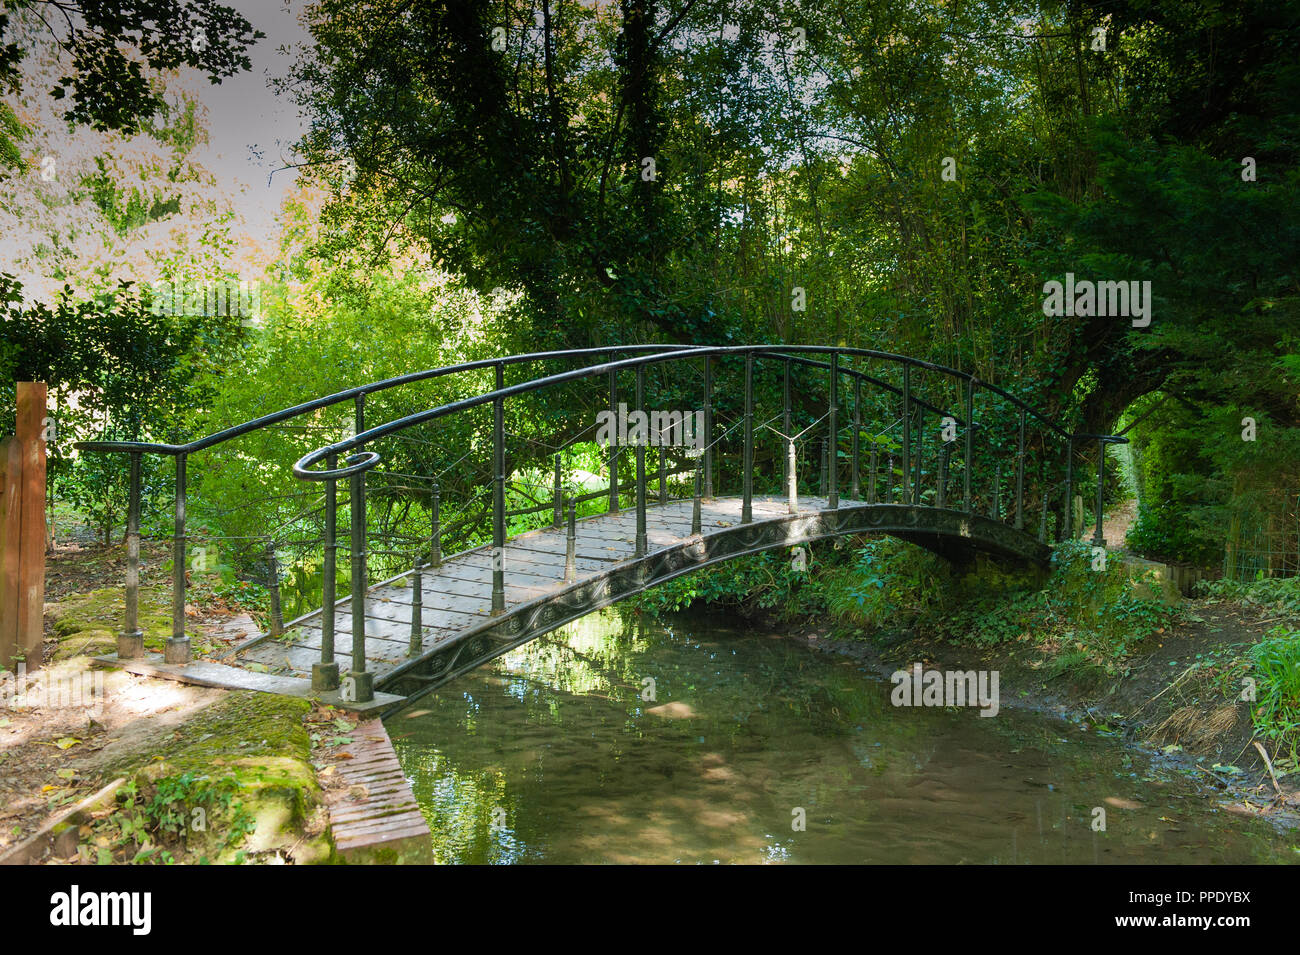 Early 19th century cast iron footbridge over River Wylye in Bishopstrow, Wiltshire, UK. Stock Photo